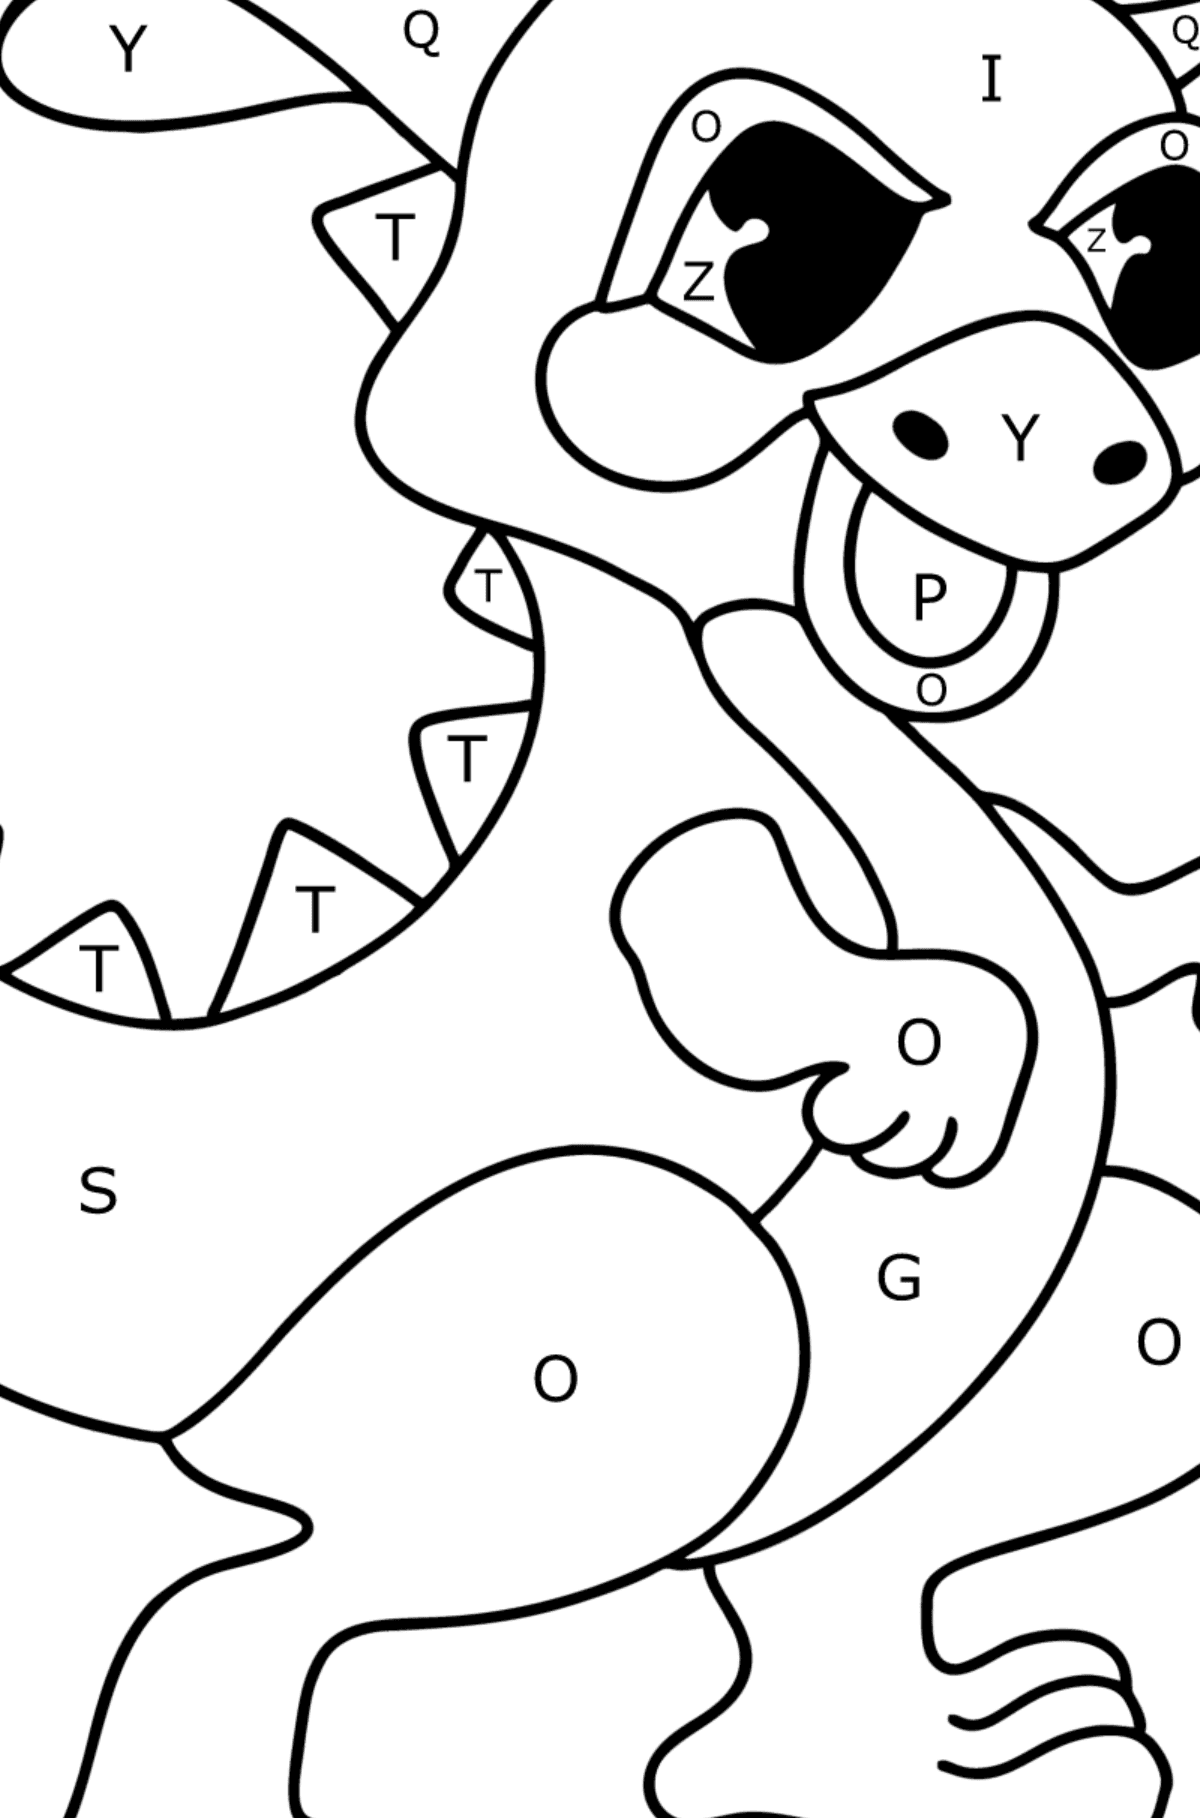 Cartoon dragon coloring page - Coloring by Letters for Kids